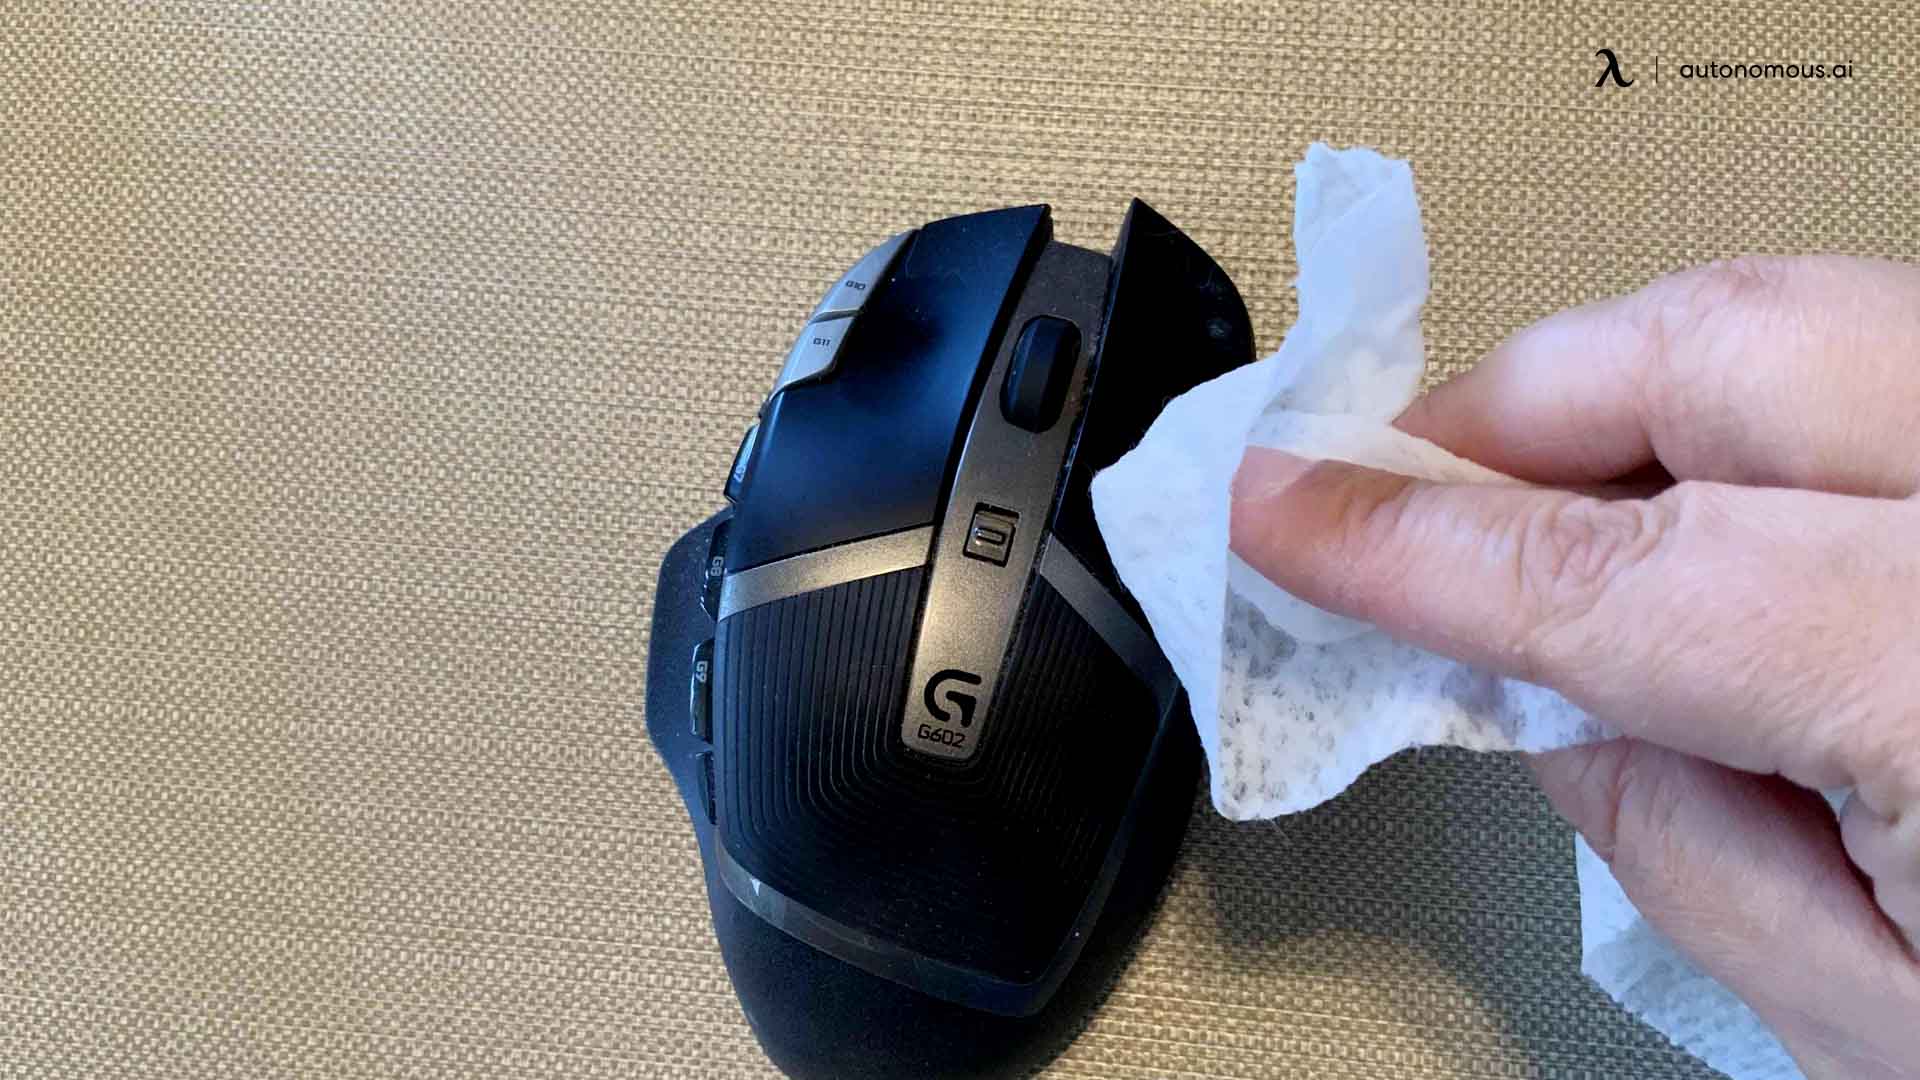 Clean your computer mice